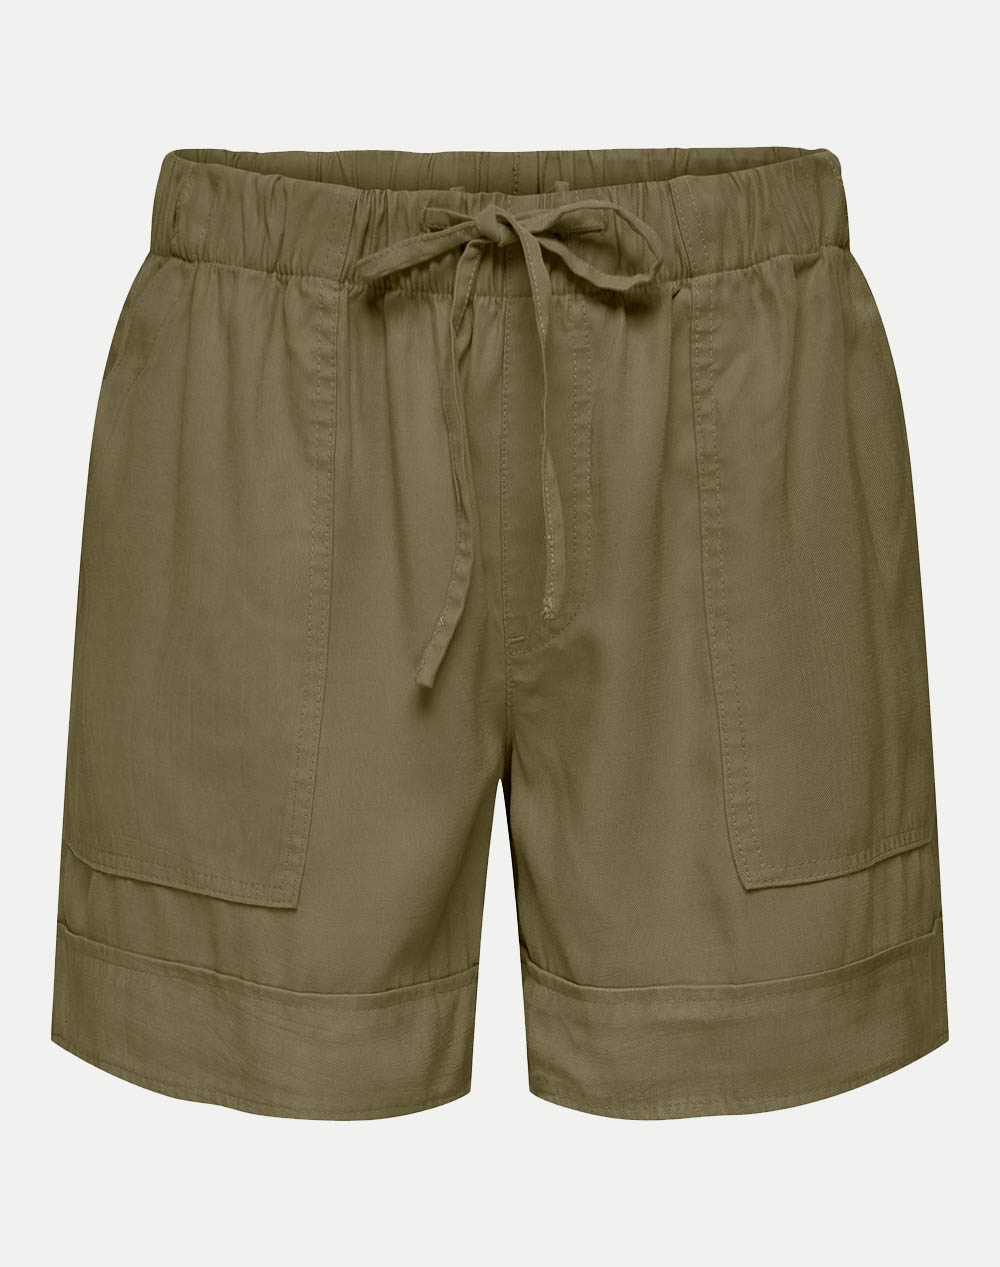 ONLY ONLARIS LIFE CARGO SHORTS PNT 15291256-Martini Olive Olive 3610AONLY2300027_XR09185